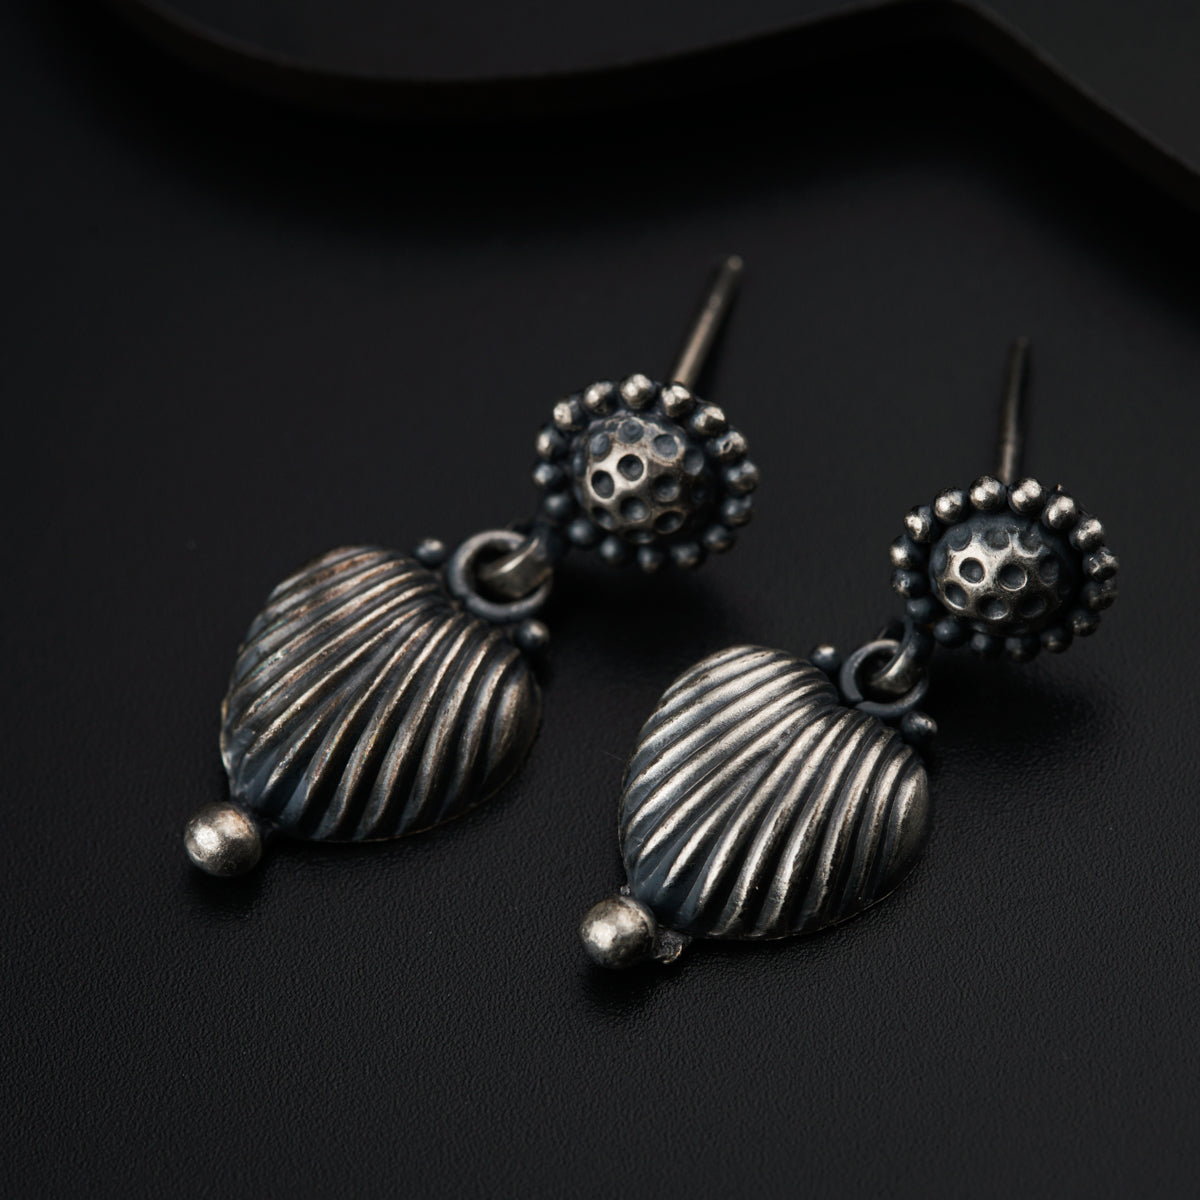 a pair of seashell earrings on a black surface